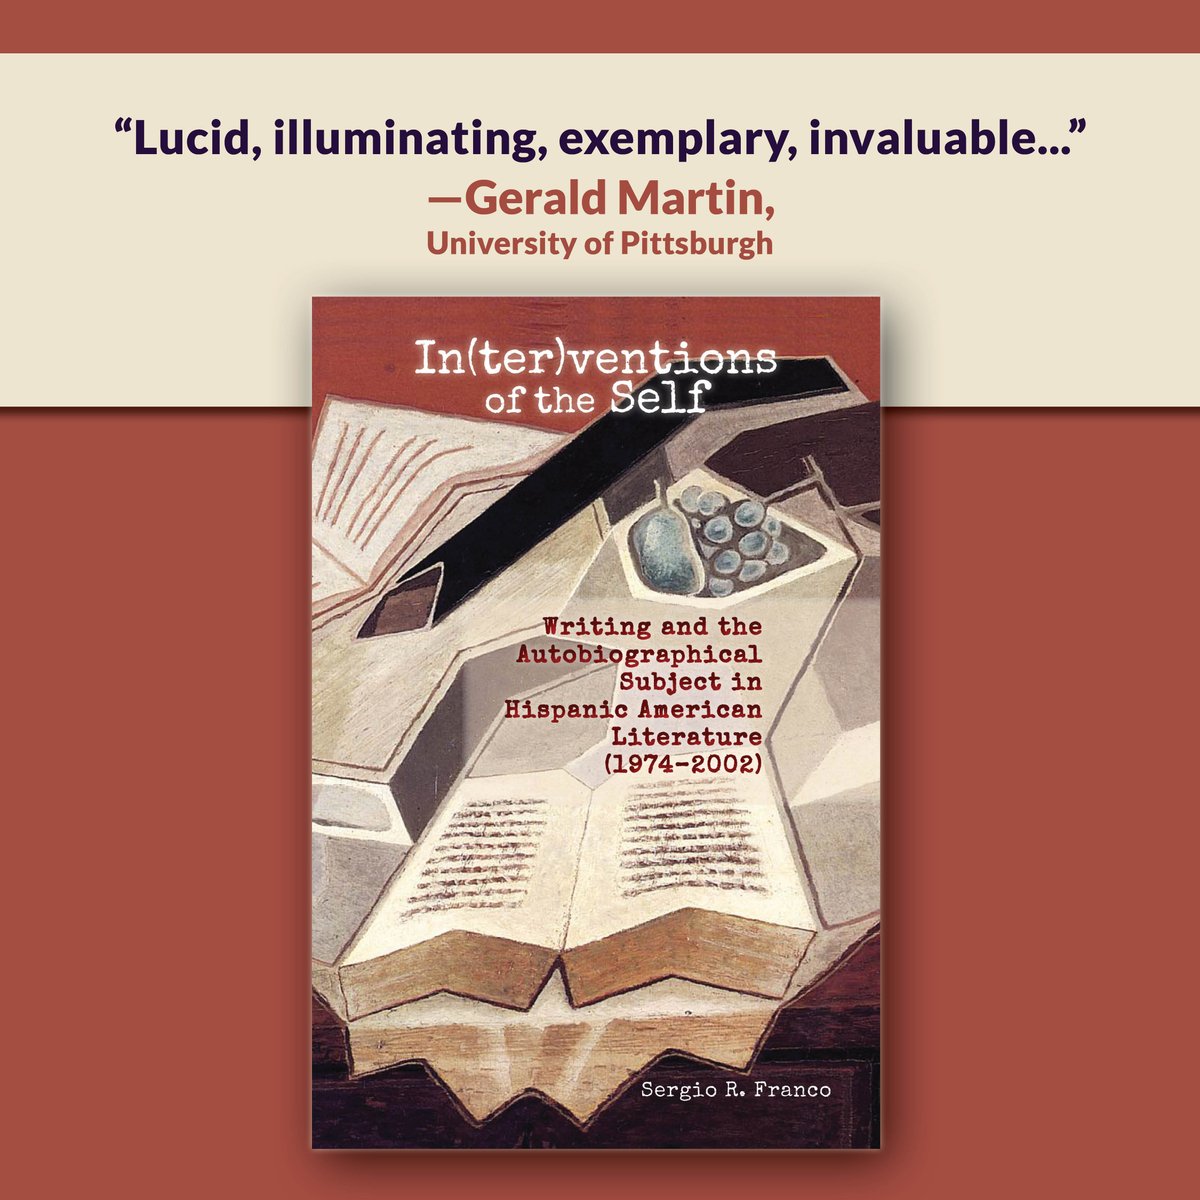 'Readers will emerge from their engagement with this dazzling work with new insights about the theory & practice of autobiography, the history of Latin American literature, & indeed the history of Latin America itself.' —Gerald Martin, Univ of Pittsburgh ow.ly/fE0N50RqcCE